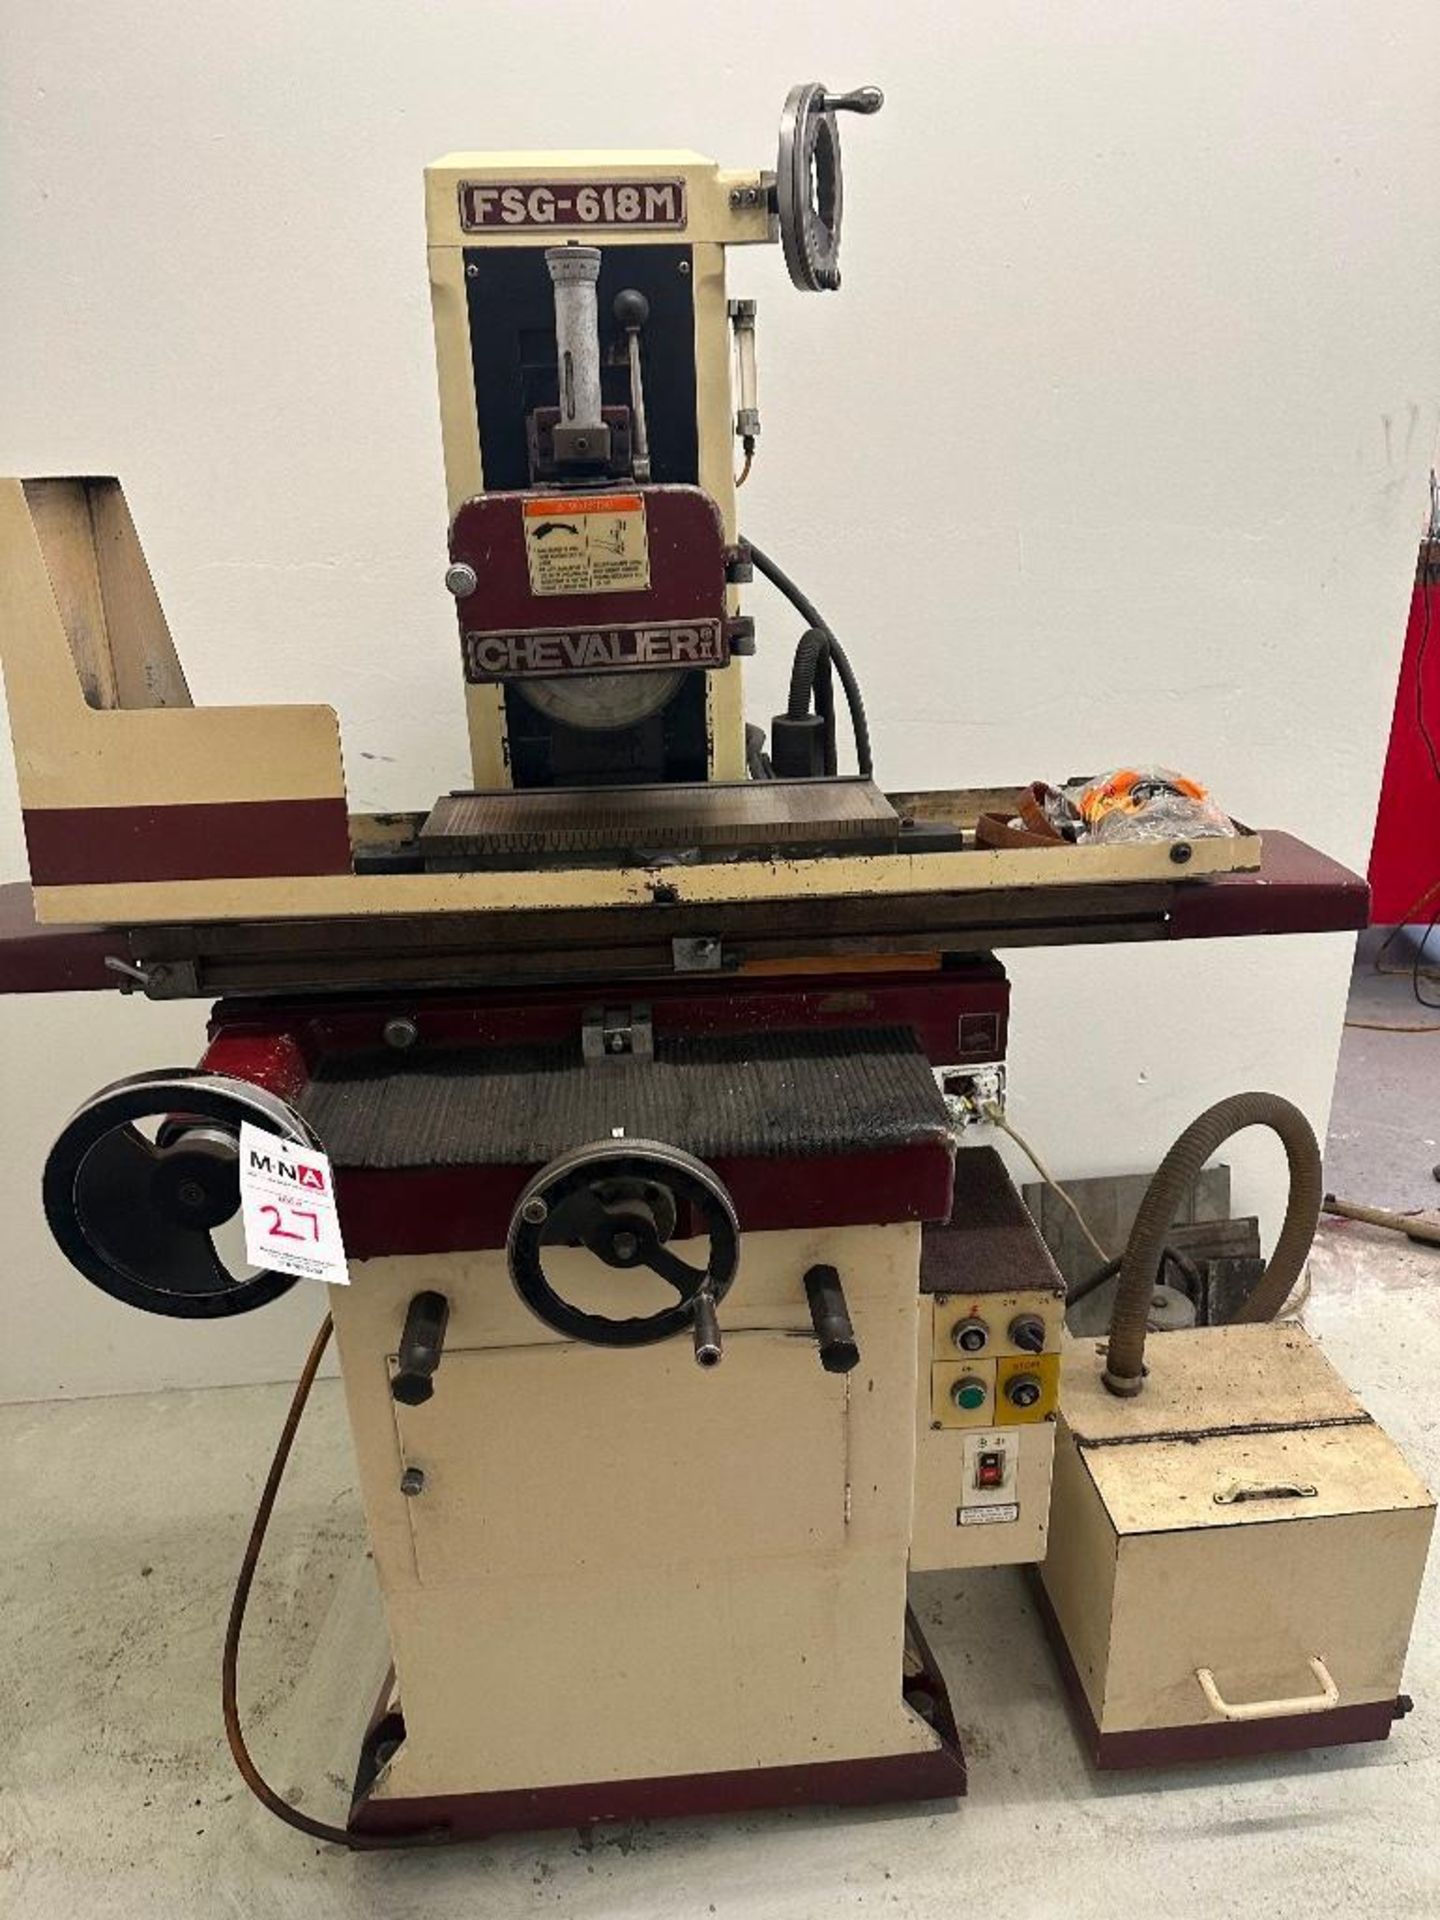 Chevalier FSG-618M Hand Feed Surface Grinder, magnetic chuck, coolant tank, s/n A33L5025